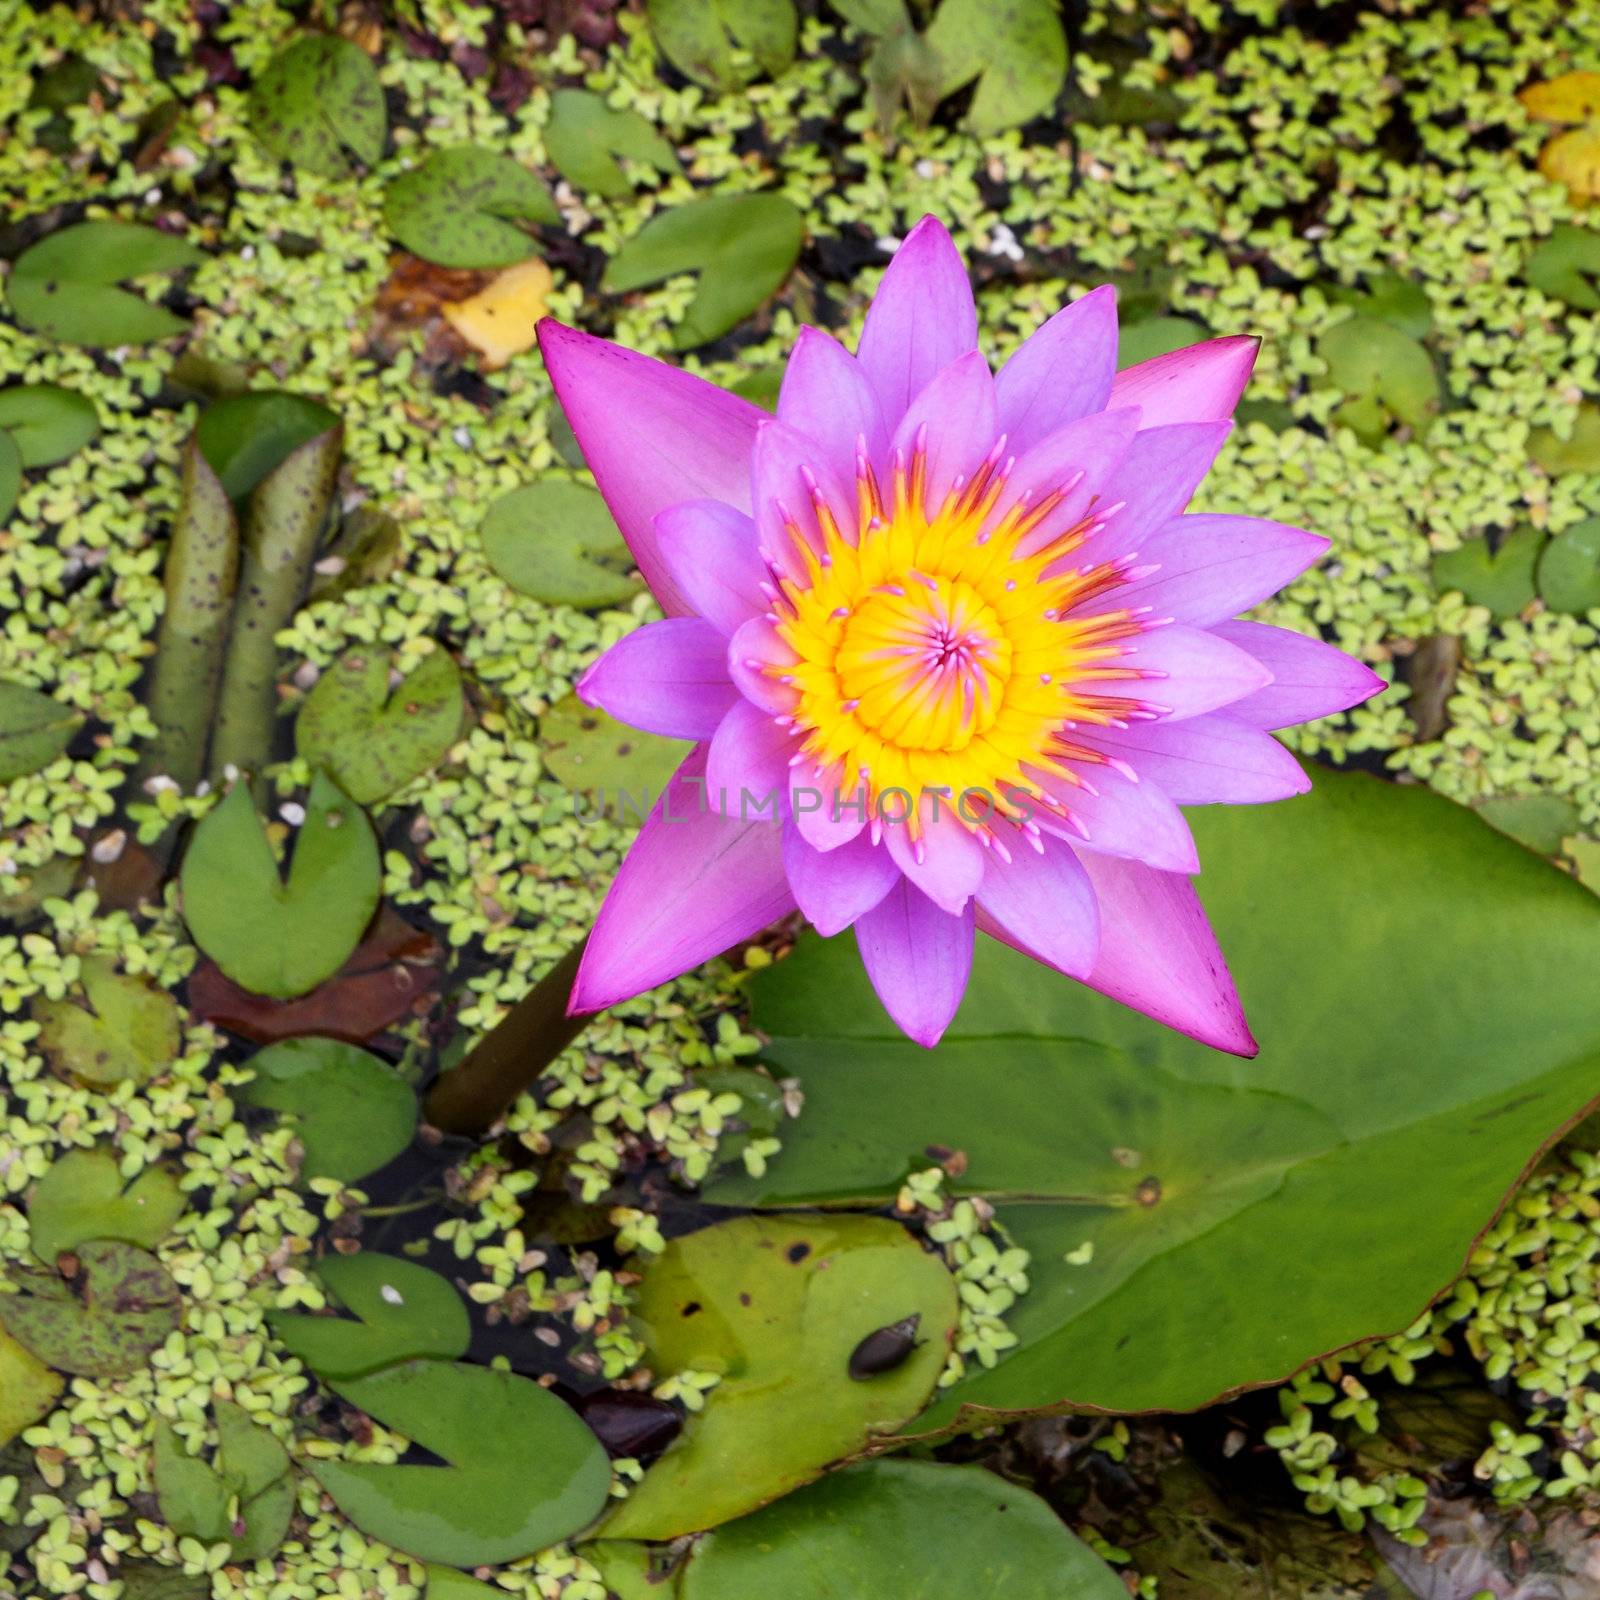 the lotus blooming on lotus pond by geargodz